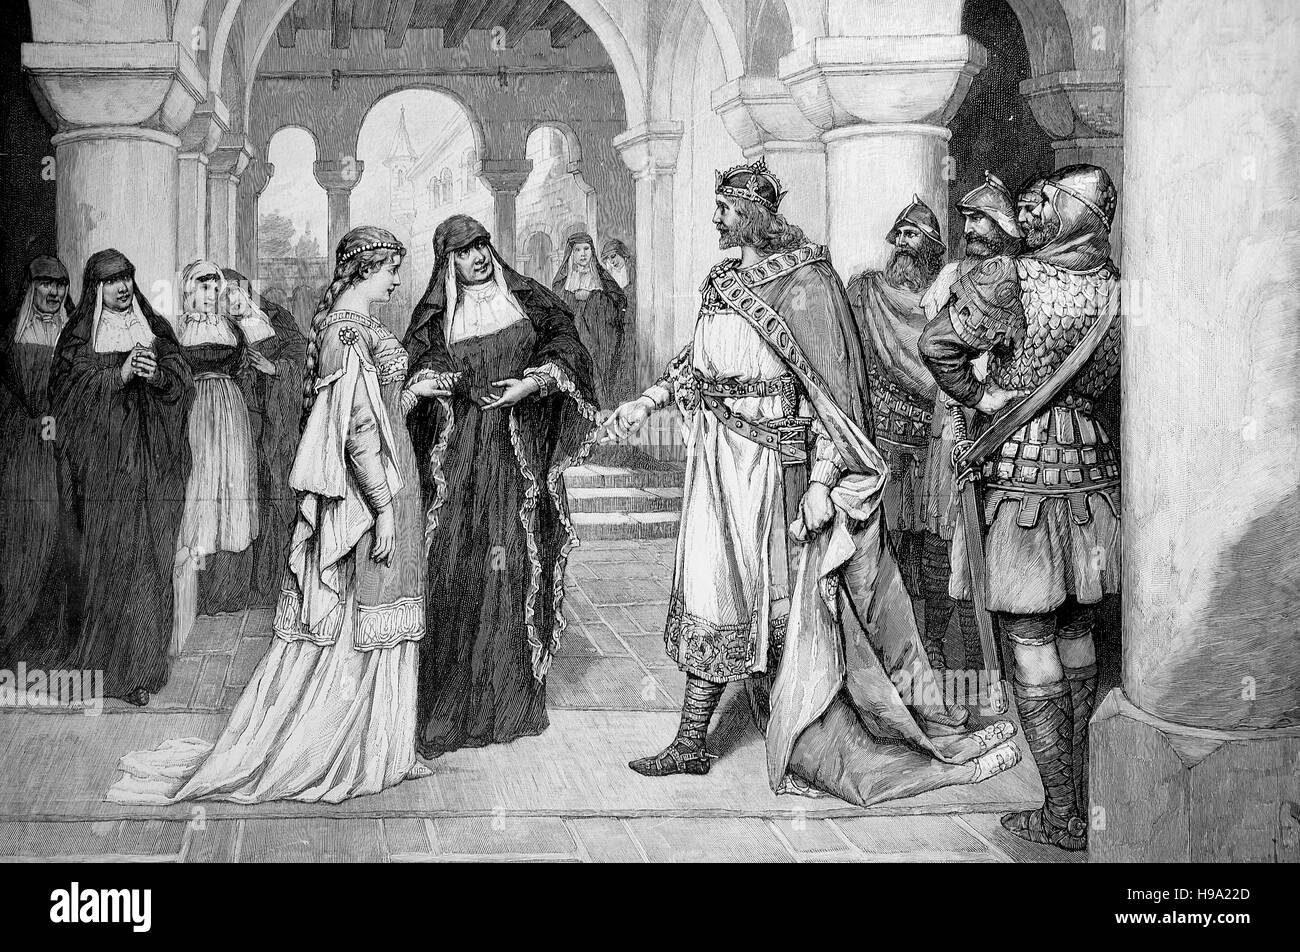 Henry the Fowler, Heinrich der Finkler or Heinrich der Vogler, 876 - July 2, 936, was the duke of Saxony from 912 and the elected king of East Francia. Here his Courtship for Mathildis, historical illustration Stock Photo